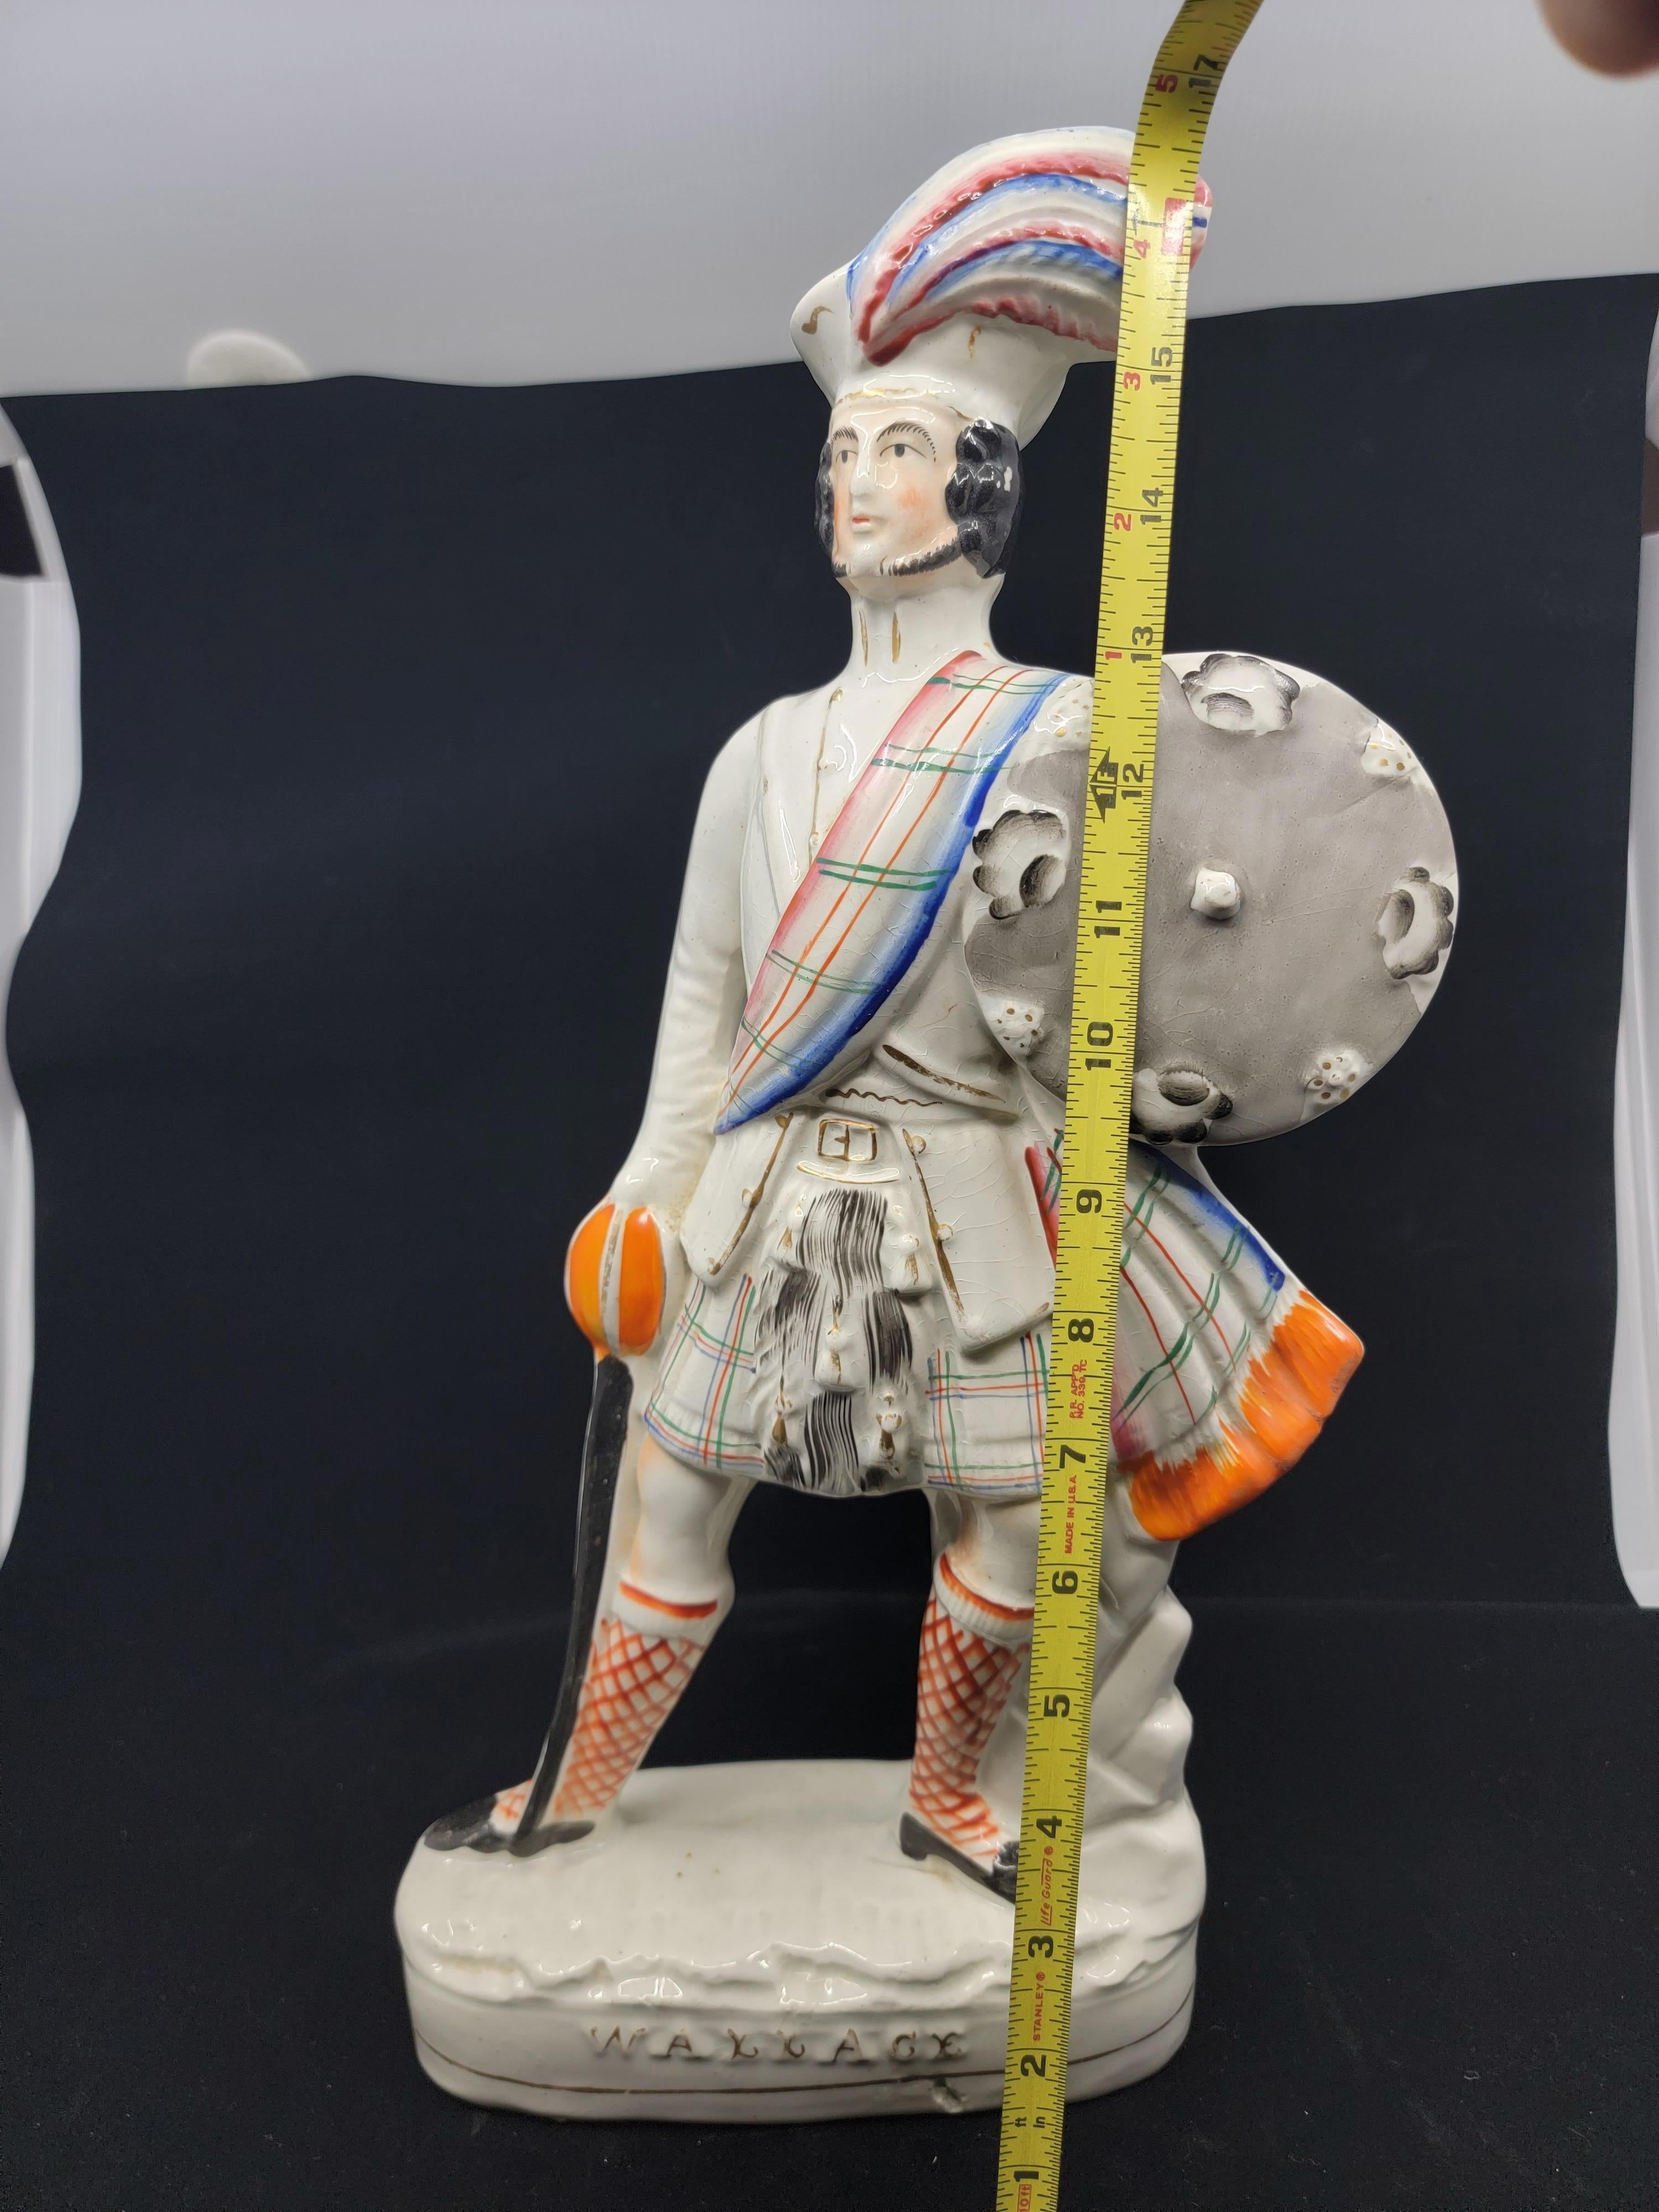 This military statue is depicting Sir William Wallace circa 1274-1305. Staffordshire Pottery created this series of Military men. Wallace one of the British Isles greats is standing leaning slightly to his left in full Scottish costume with plaid